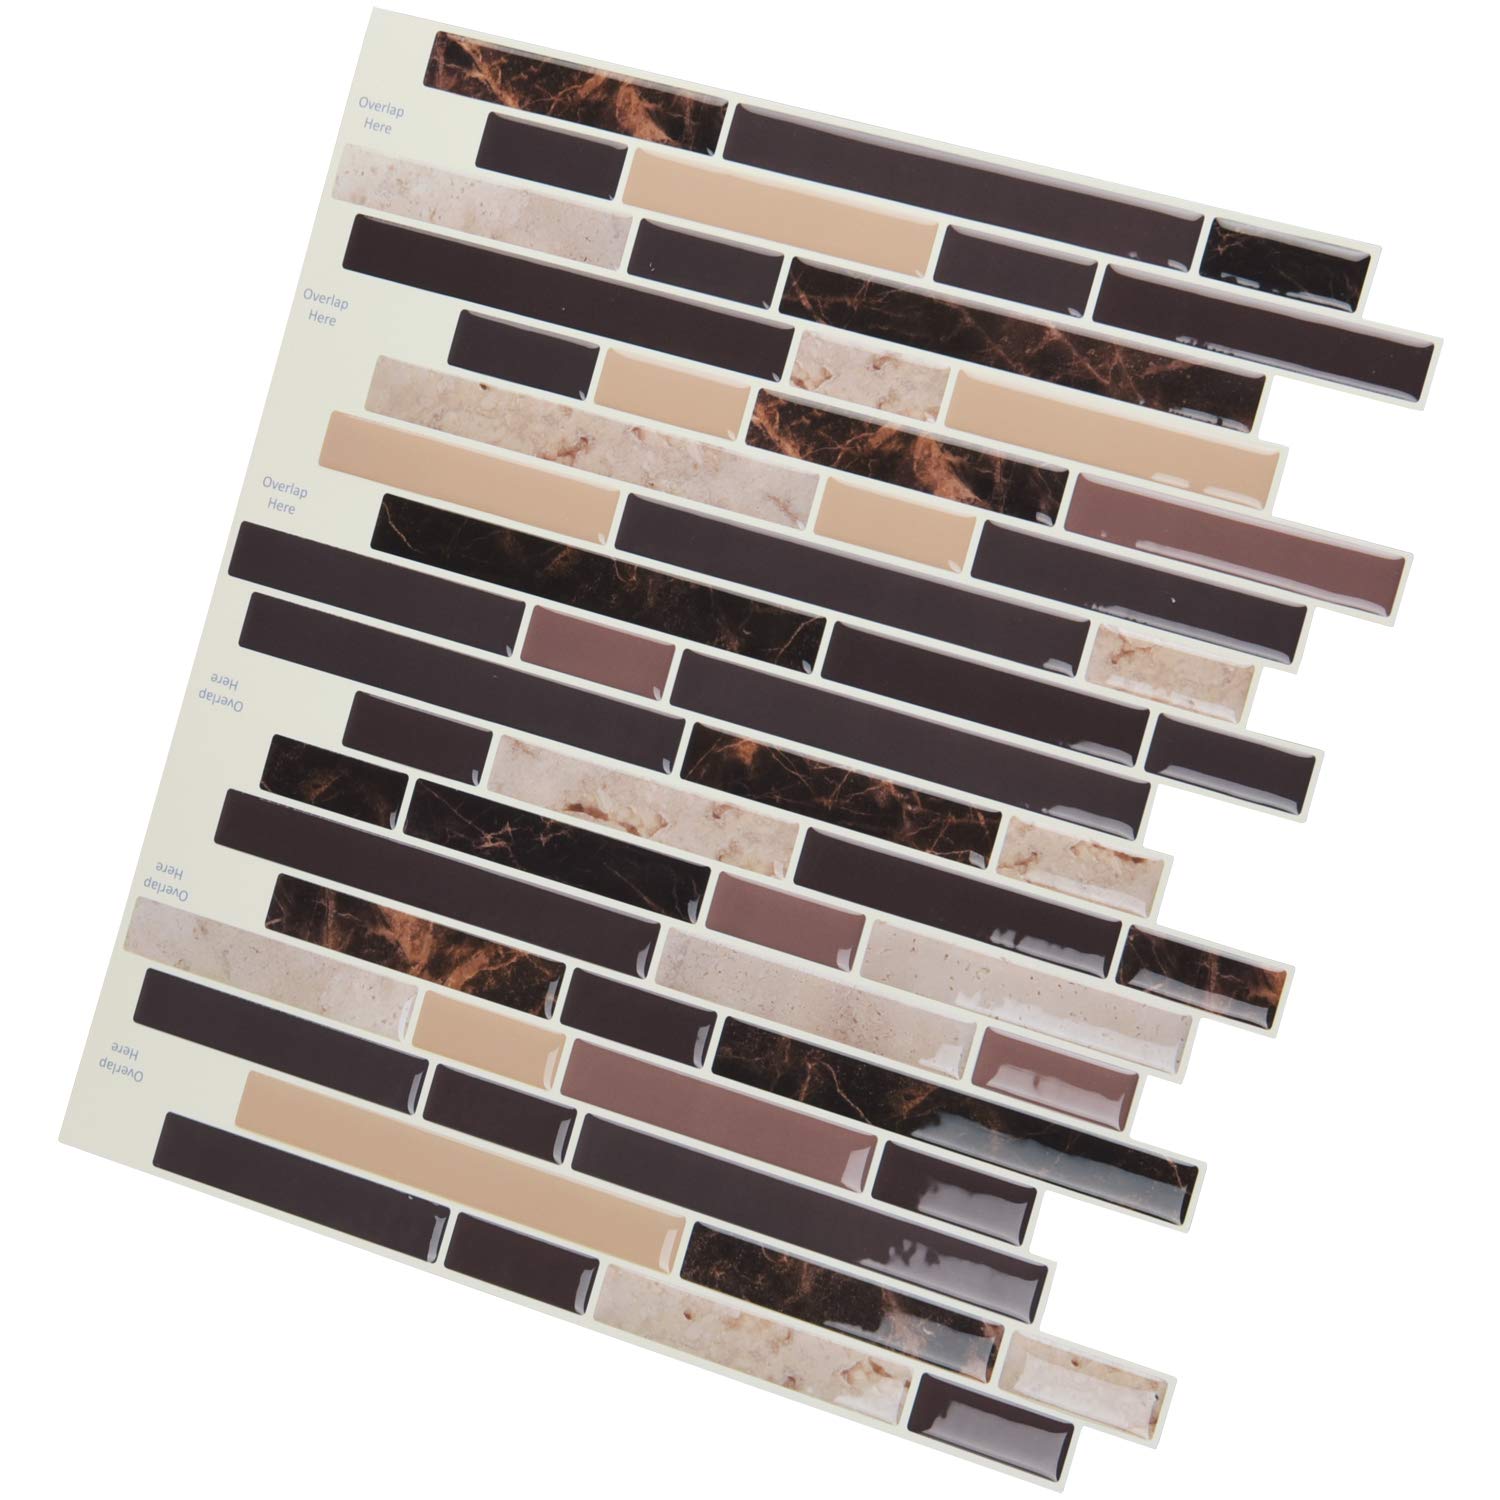 A17039 - Peel and Stick on Wall Tiles for Kitchen Backsplash, Set of 6